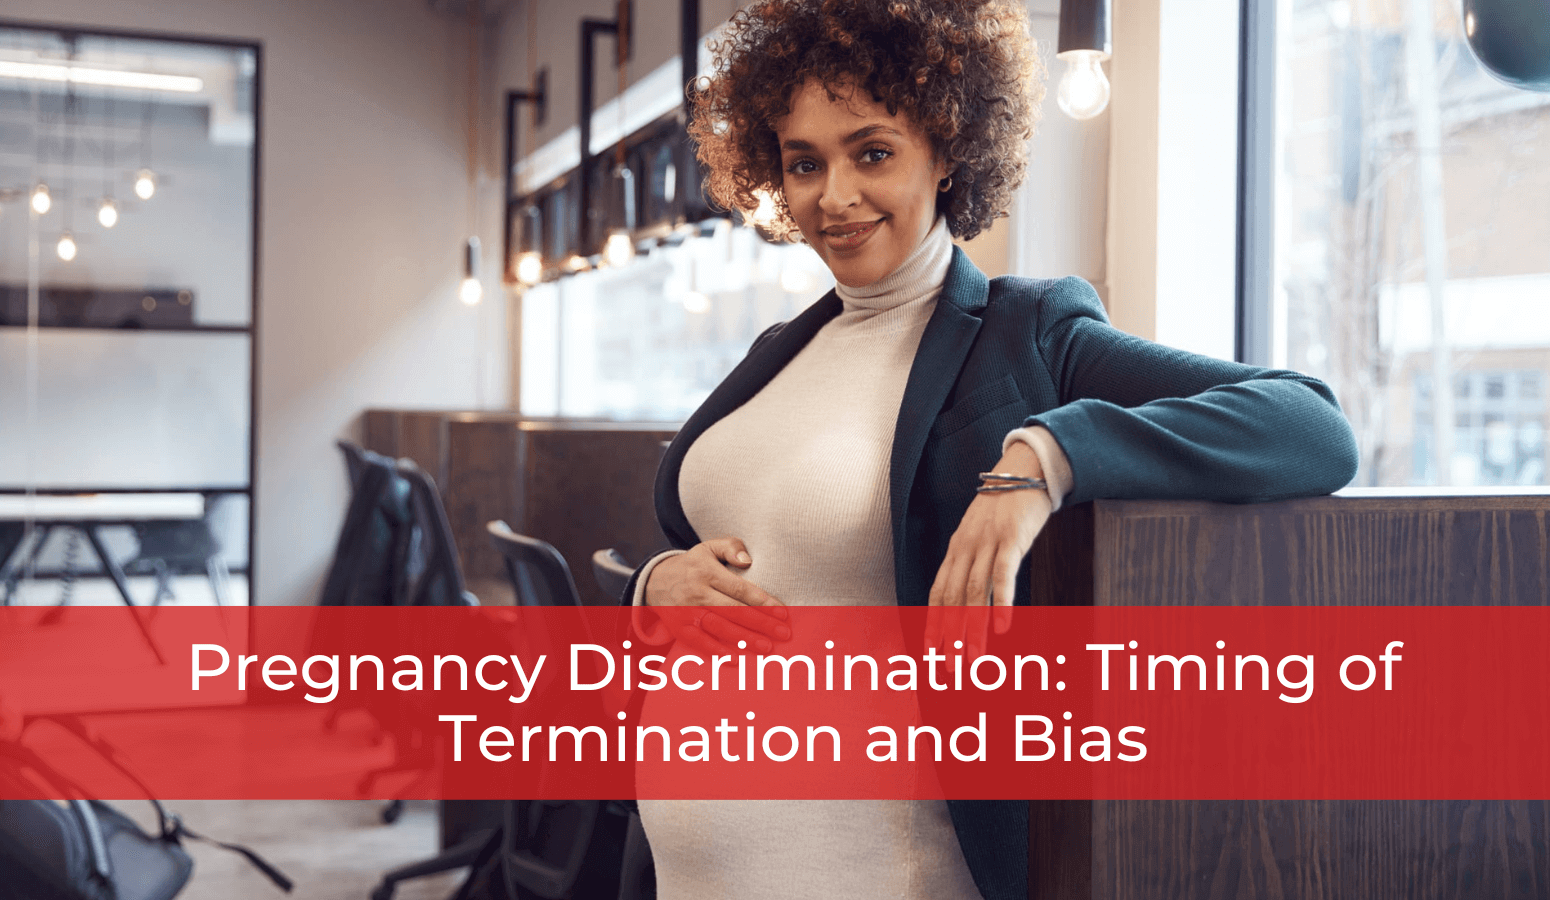 Featured image for “Pregnancy Discrimination: Timing of Termination and Bias”